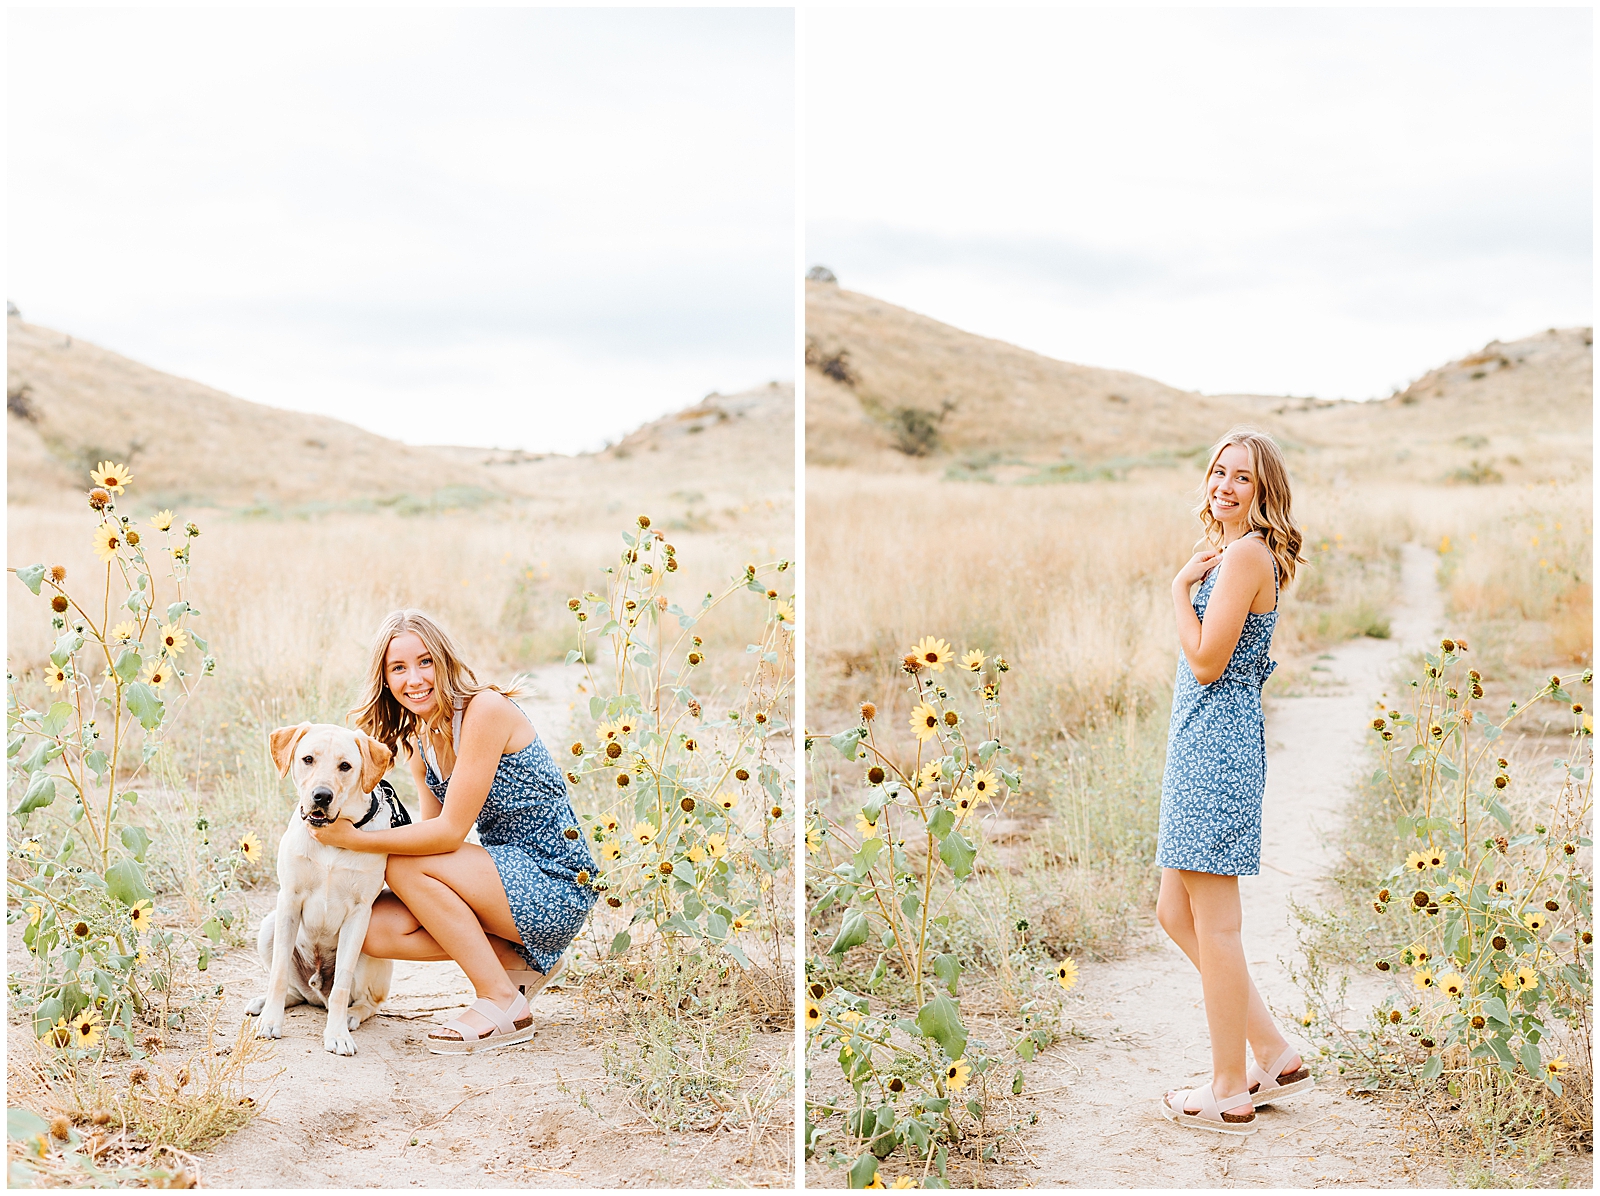 Boise Foothills Senior Session with Yellow lab puppy